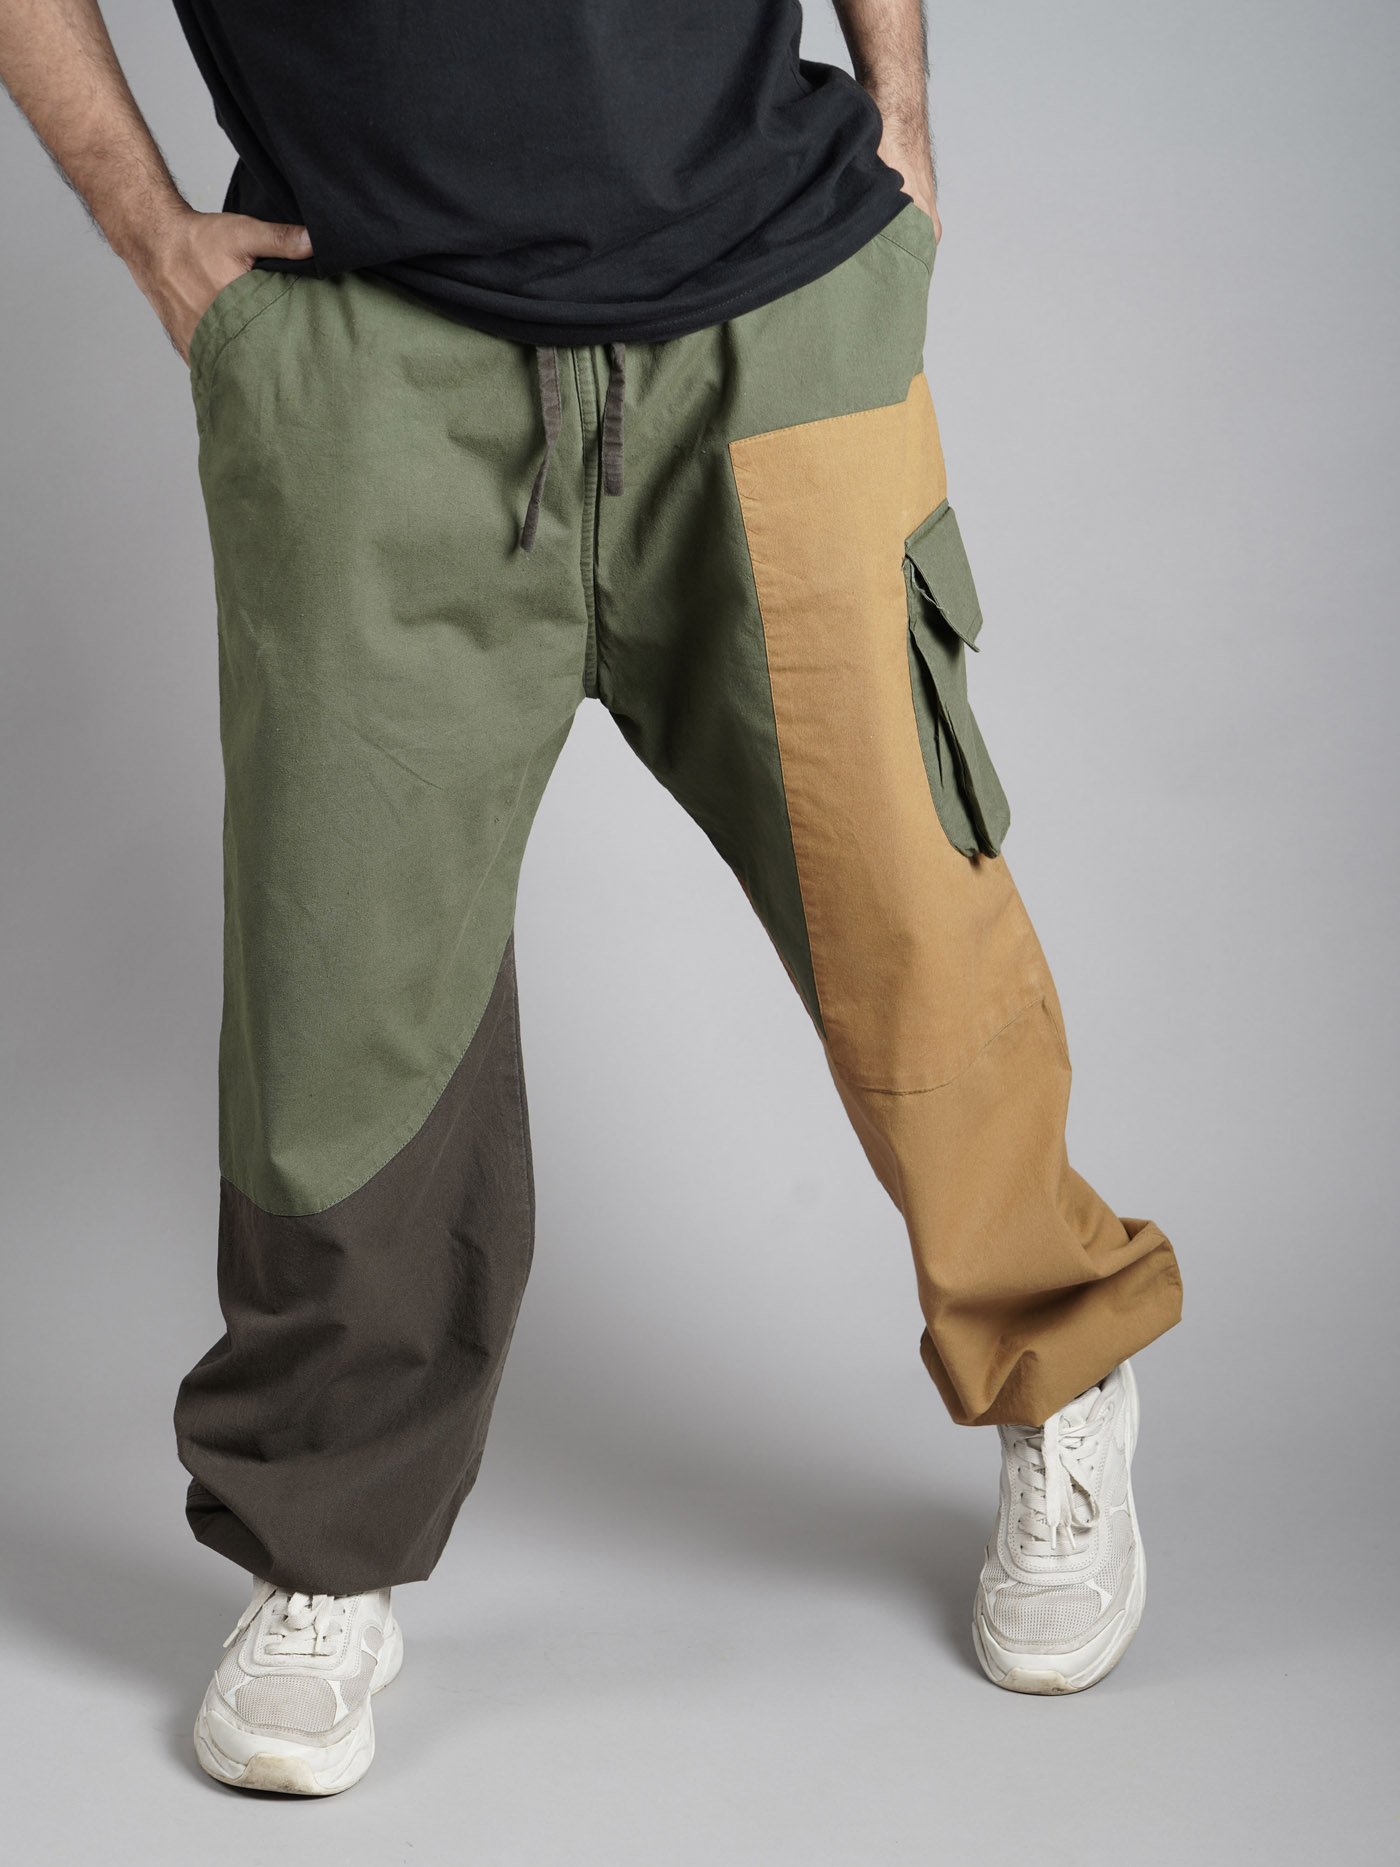 Turquoise & Beige Textured Hoppers – Unisex Pants For Men And Women - Bombay  Trooper